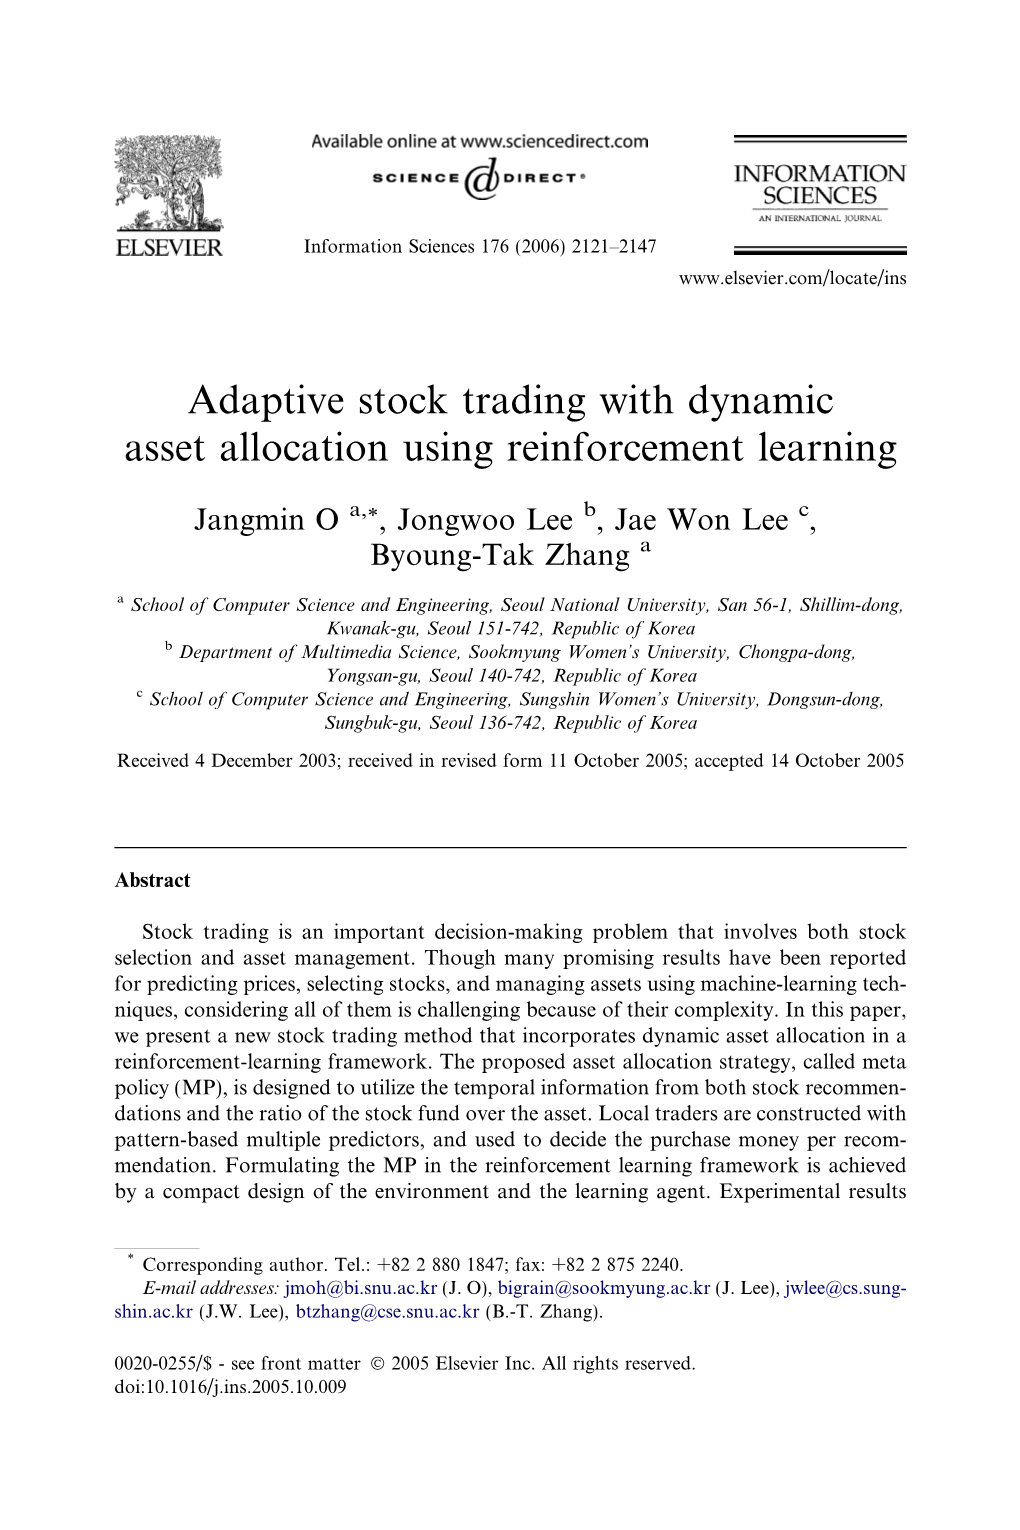 Adaptive Stock Trading with Dynamic Asset Allocation Using Reinforcement Learning